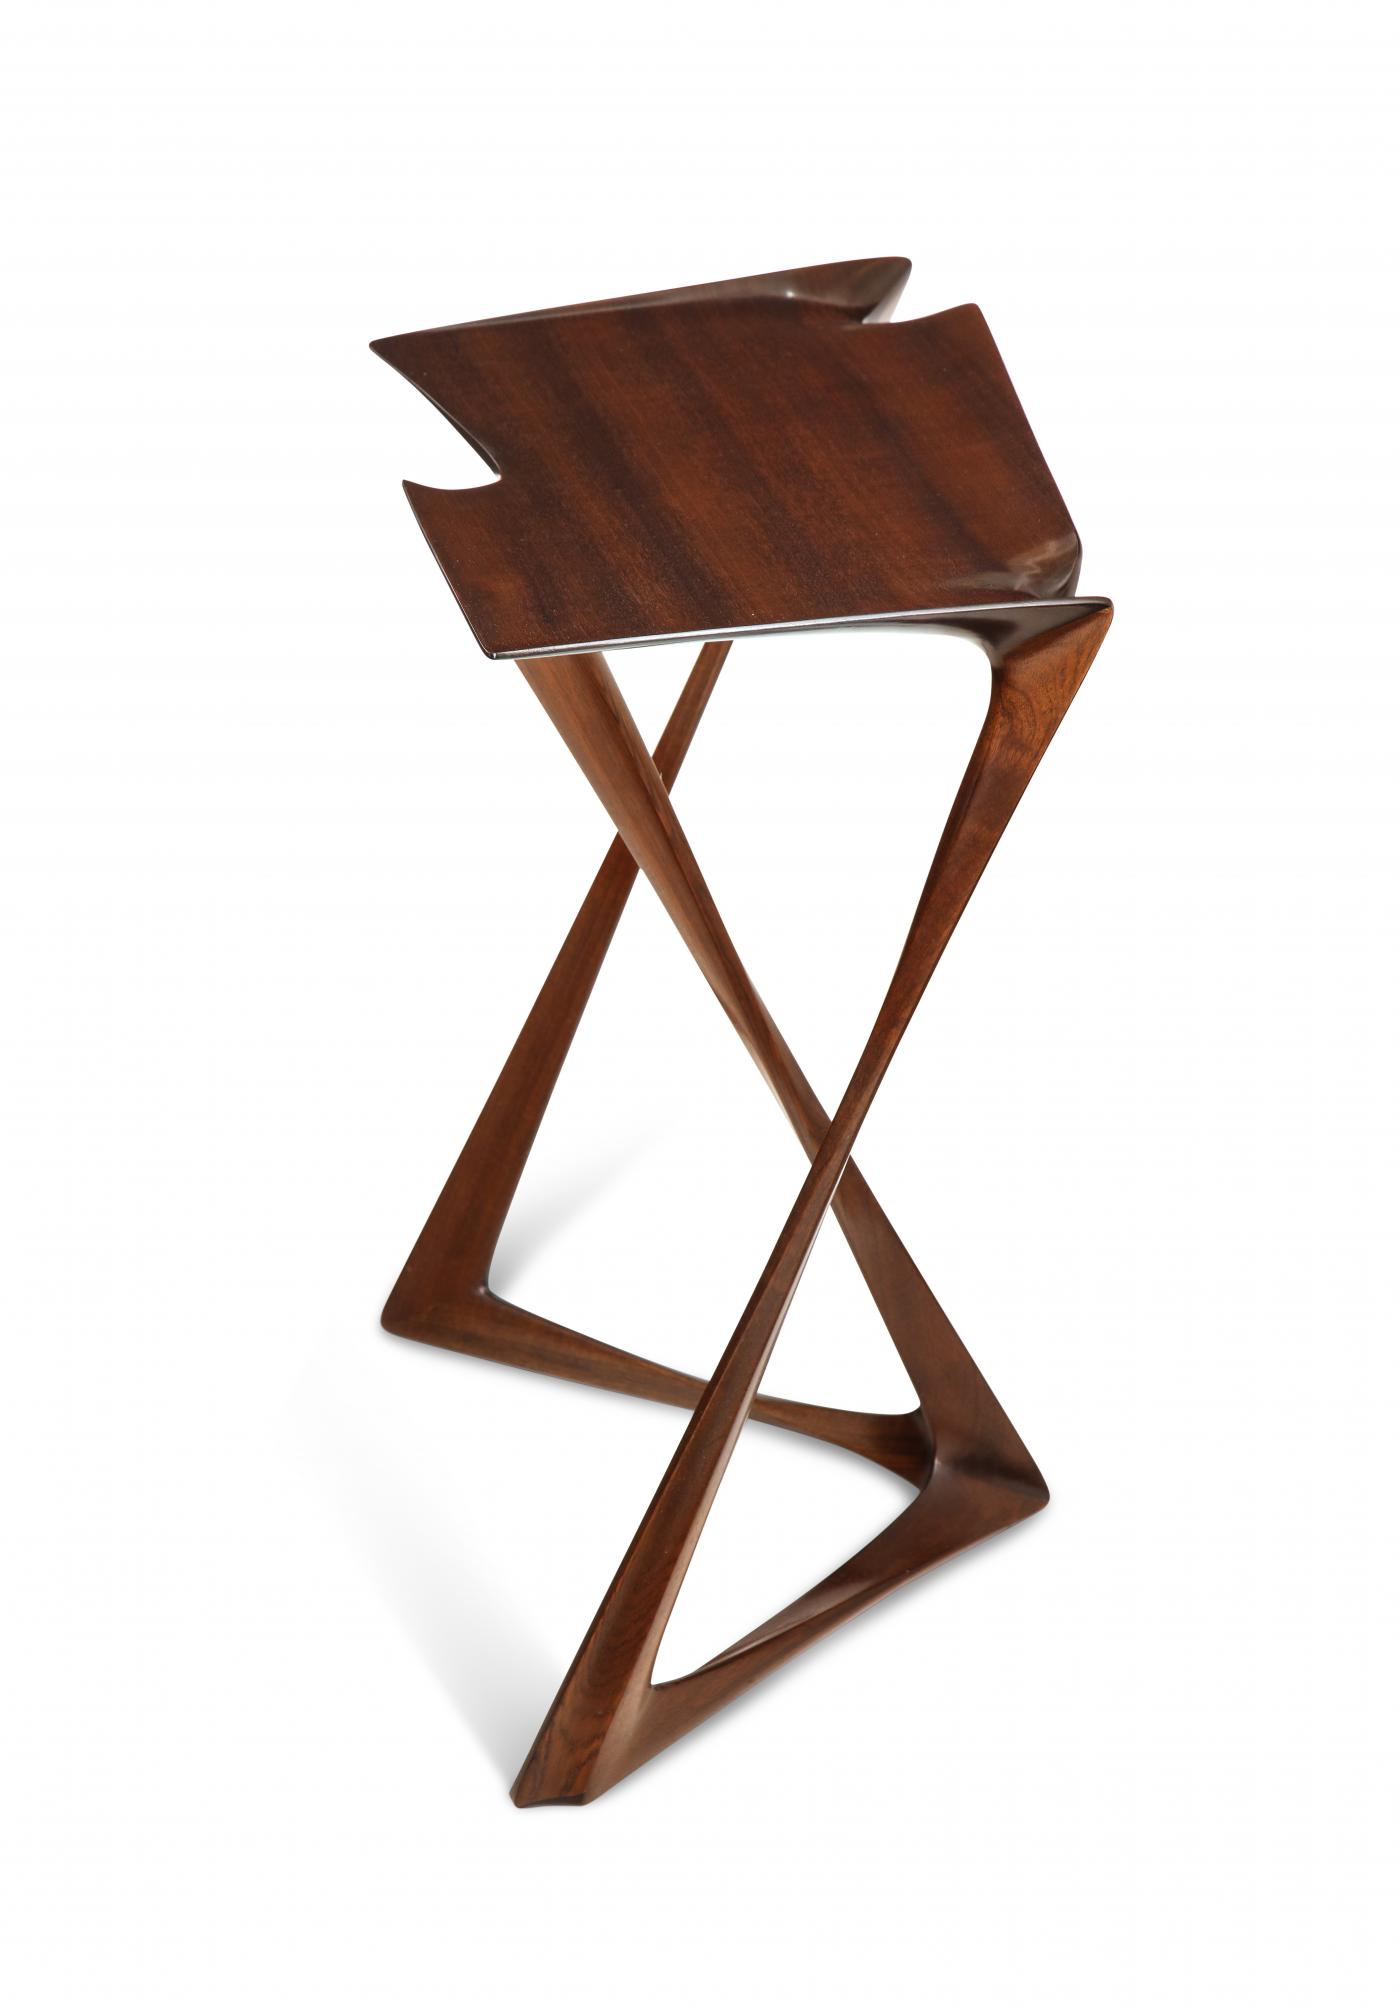 Uniquely designed side table. Designed by Newman-Krasnogorov for Olicore Studio